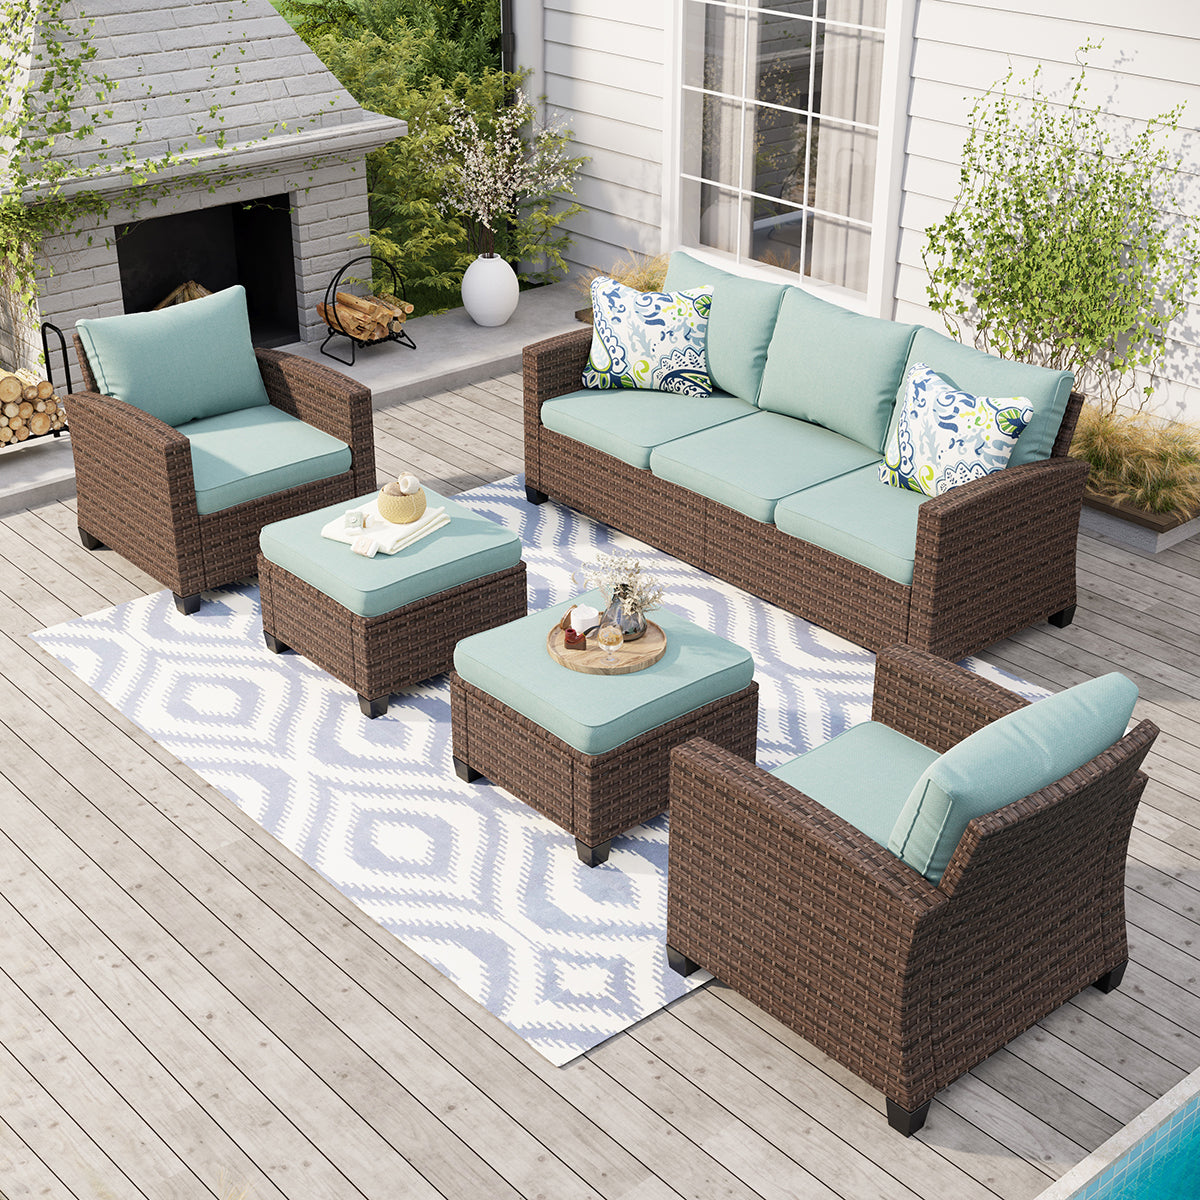 MFSTUDIO Upgraded Outdoor Sofa Set Rattan Set with Thick Cushions